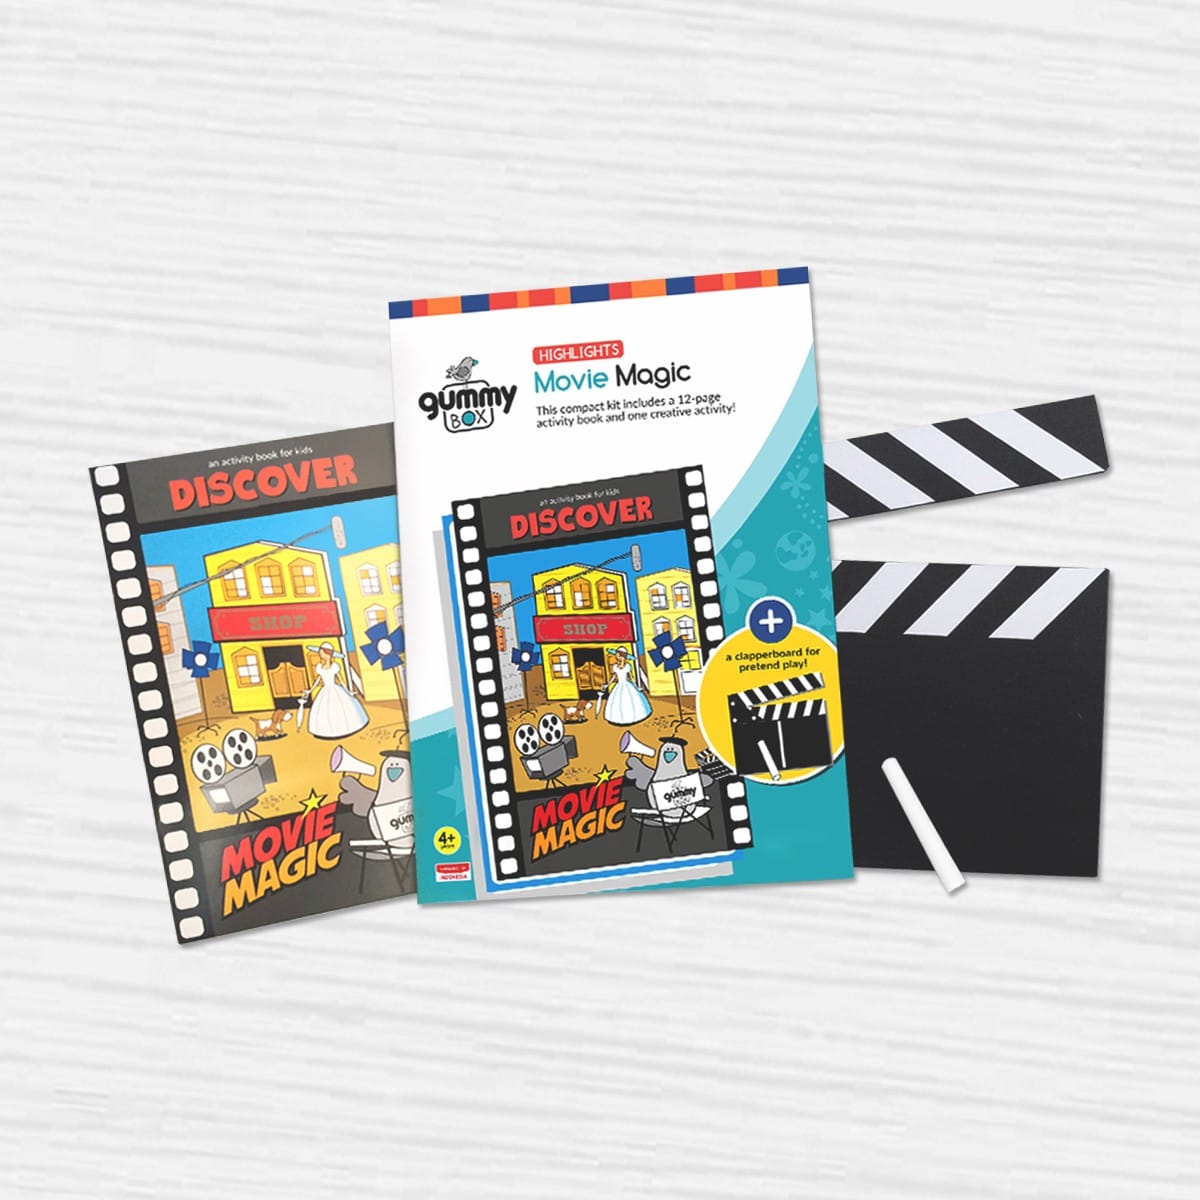 Movie-themed activity kit suitable for party favor